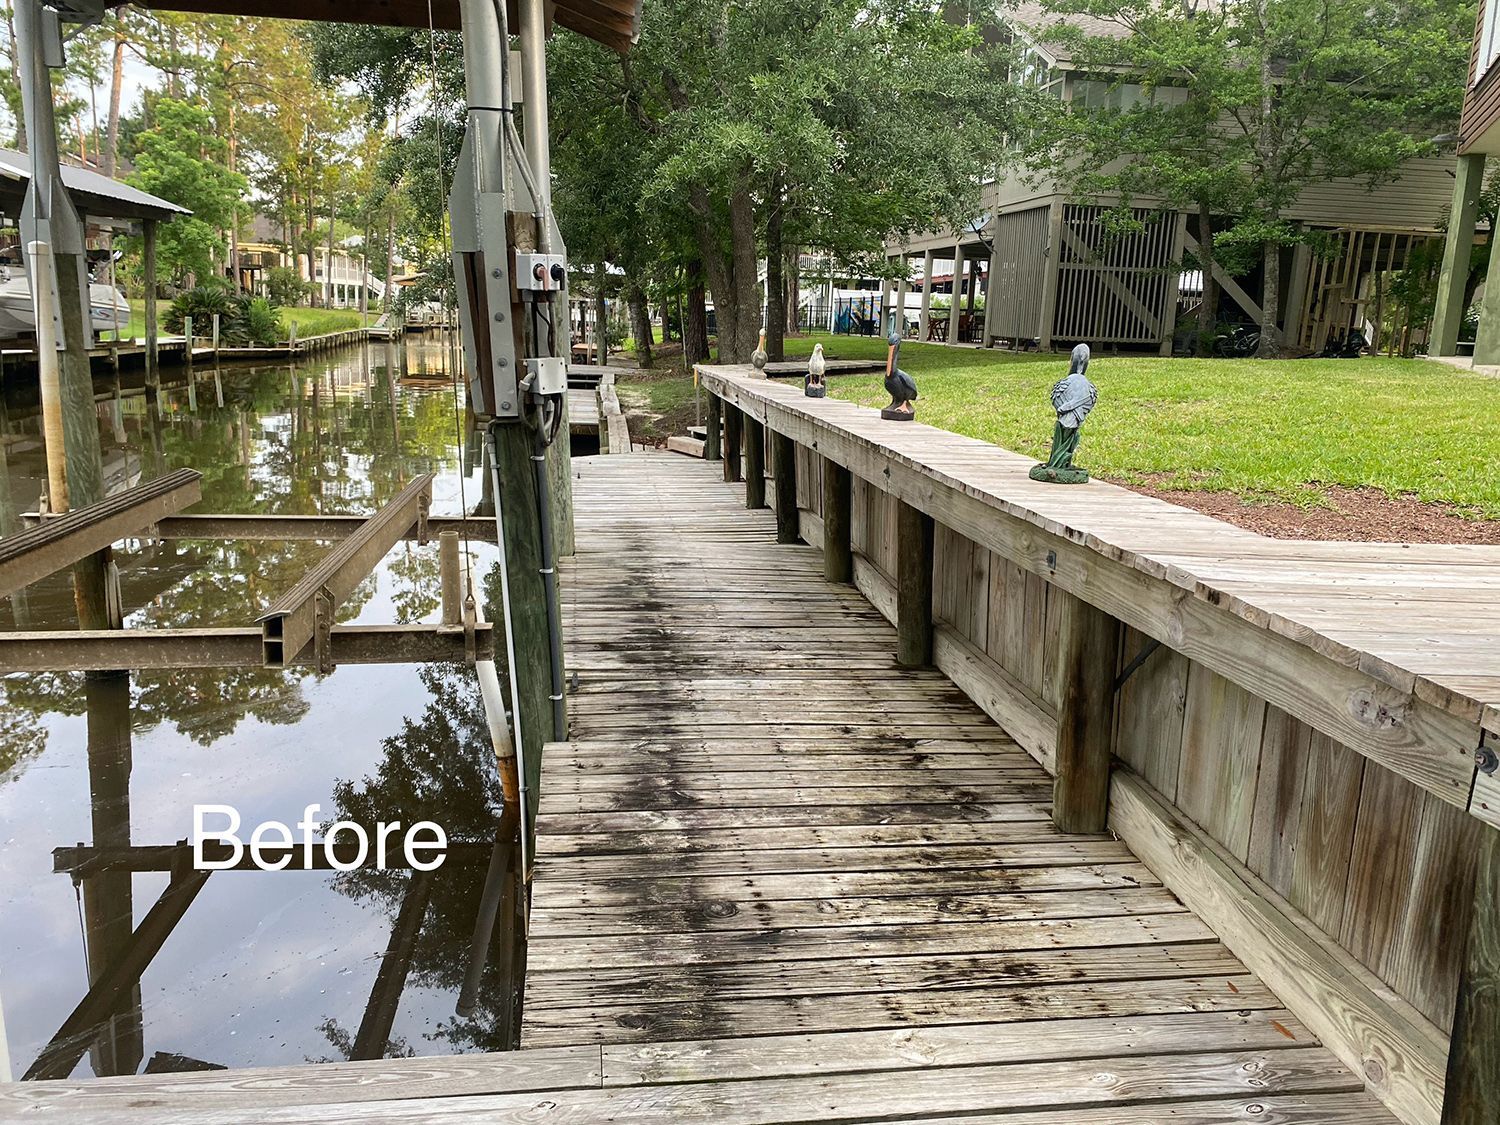 A before photo of a wooden dock next to a body of water